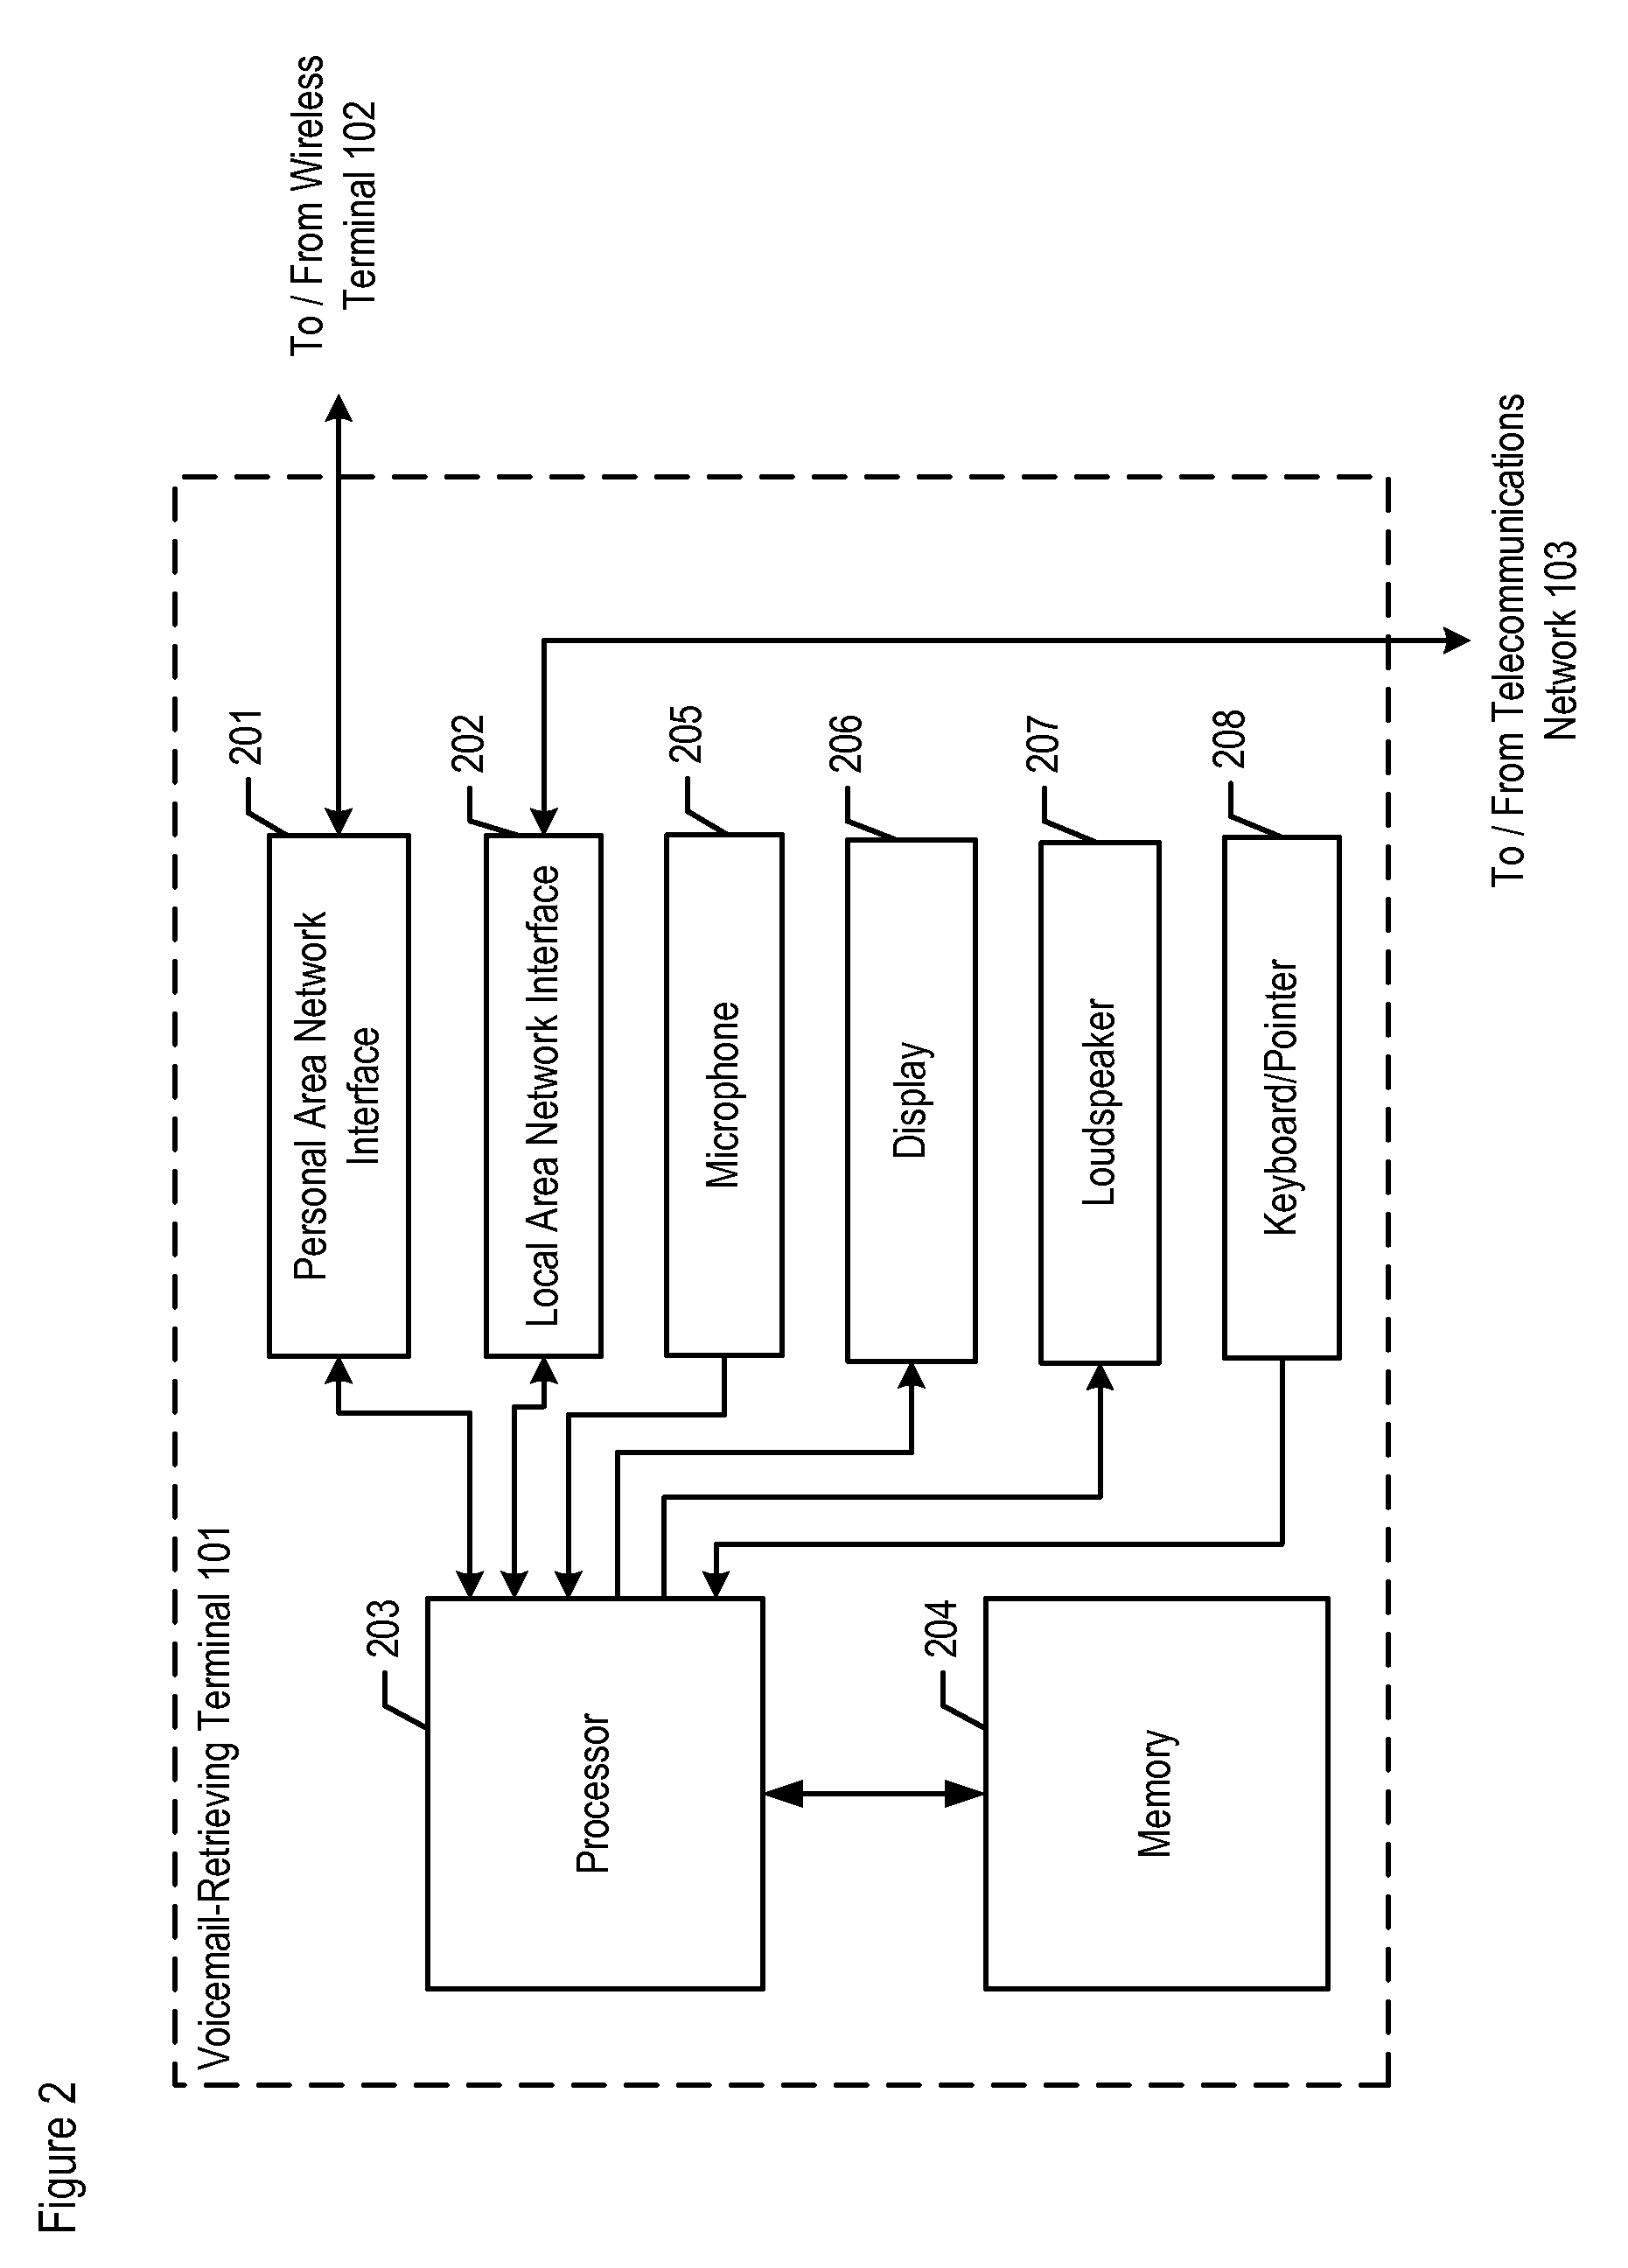 Automated Retrieval and Handling of a Second Telecommunications Terminal's Voicemail by a First Terminal